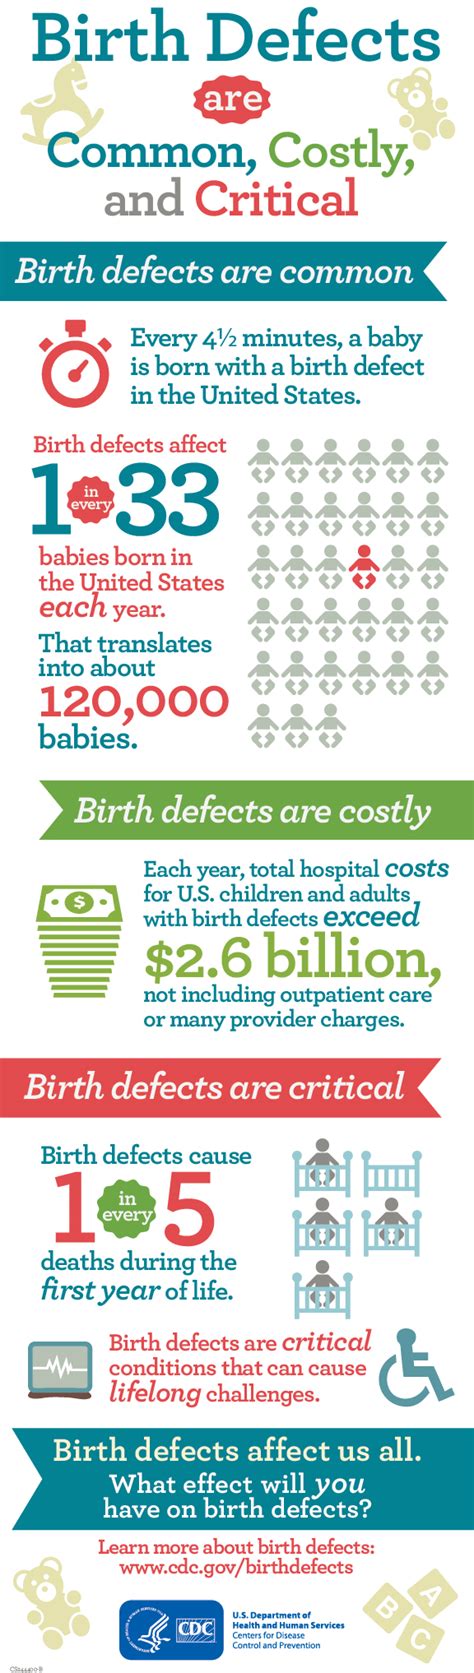 4 things to do during national birth defects prevention month congenital heart disease advocacy